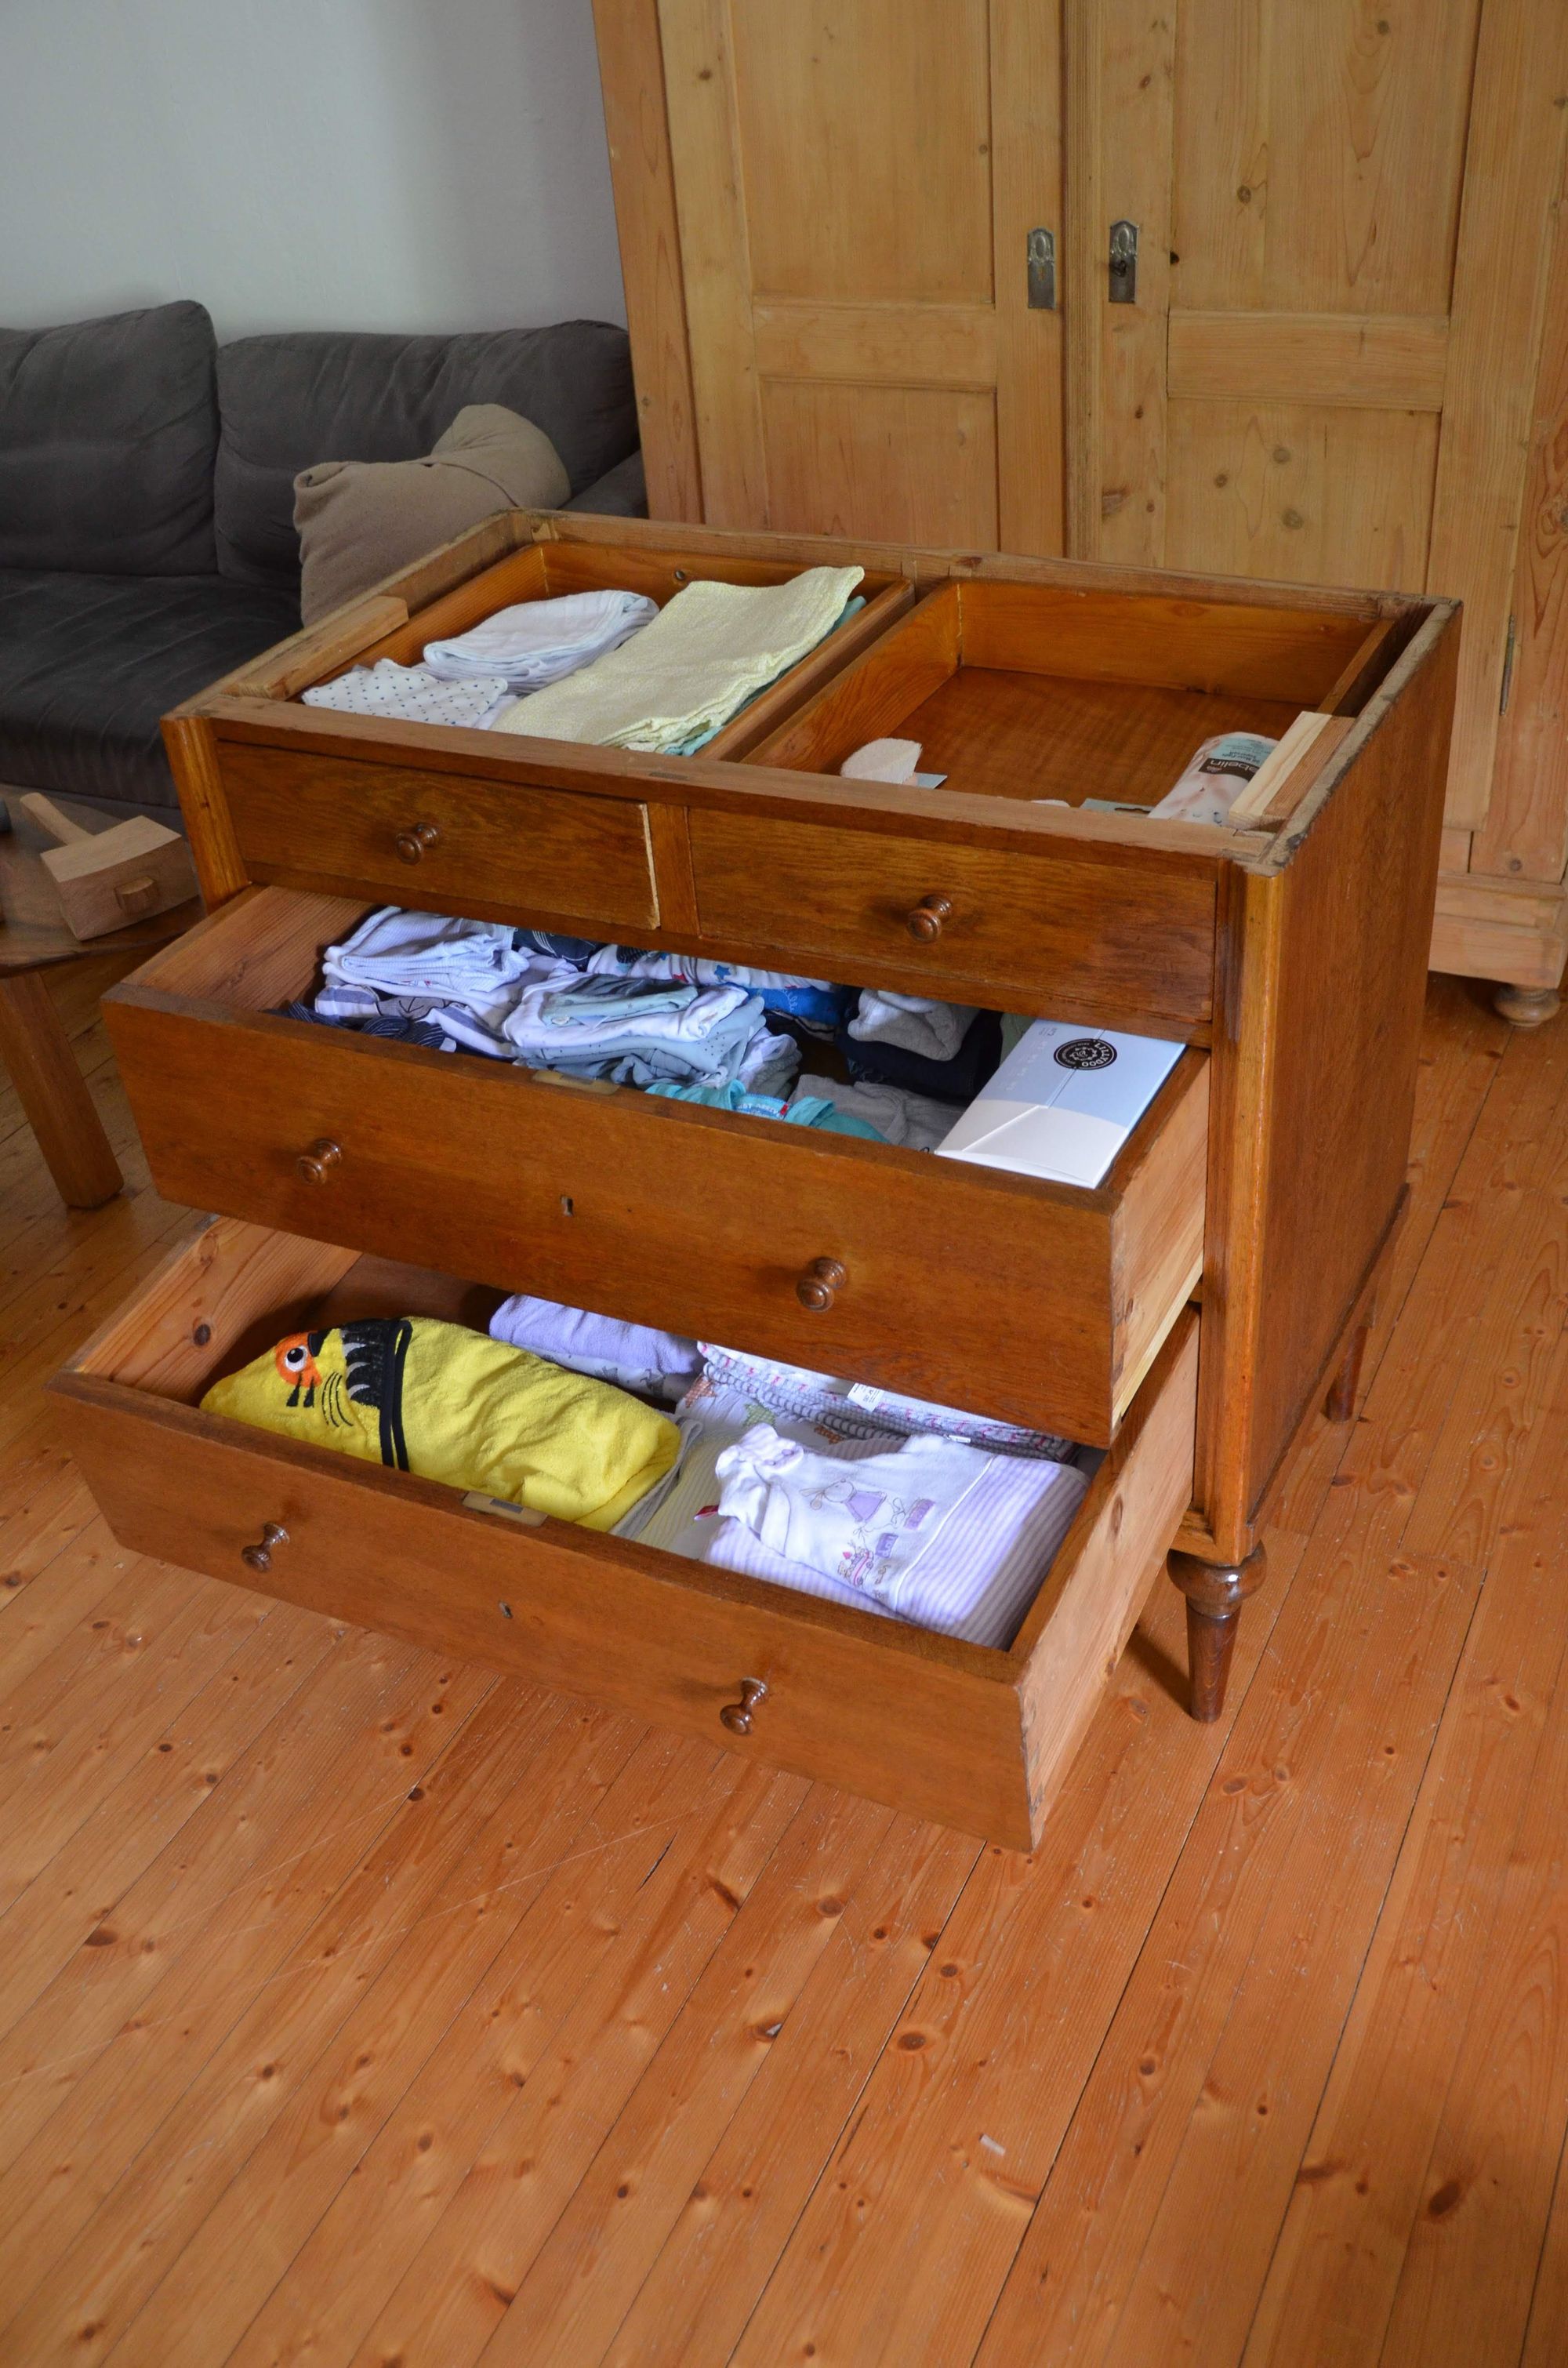 A new life for a changing table